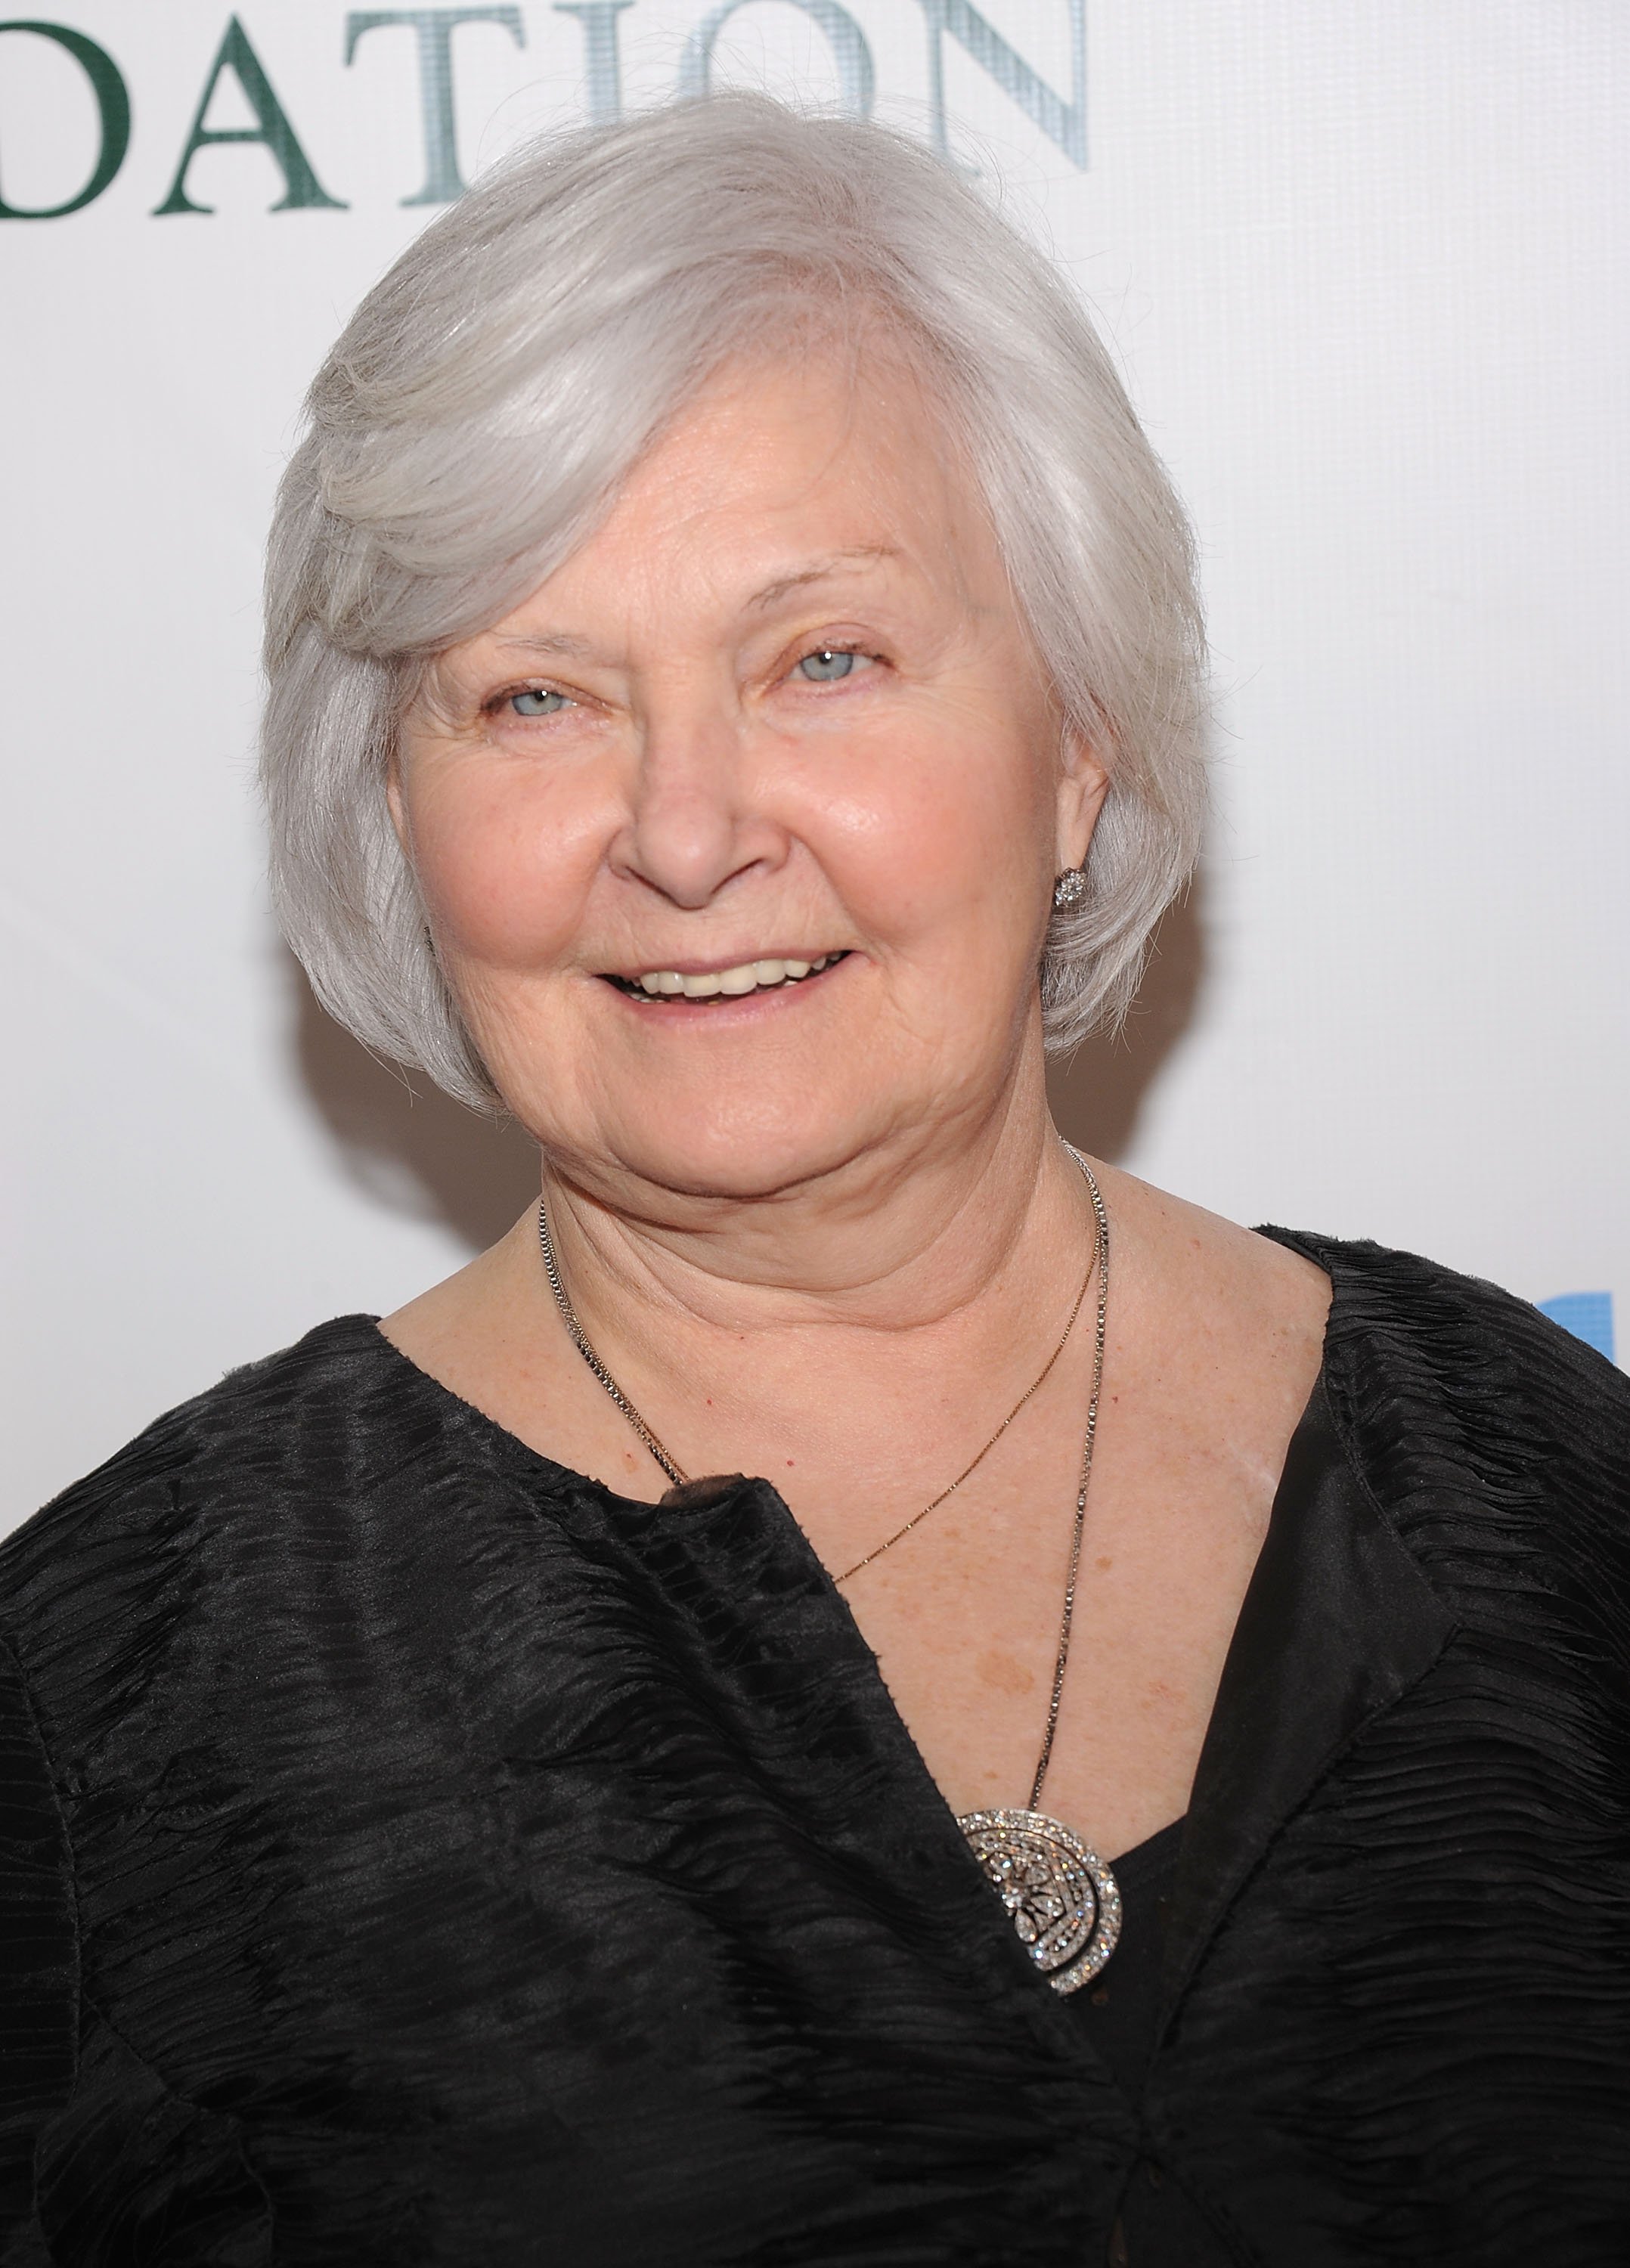 Joanne Woodward at a Celebration of Paul Newman's Dream to benefit his Association of Hole on April 2, 2012, in New York City | Source: Getty Images